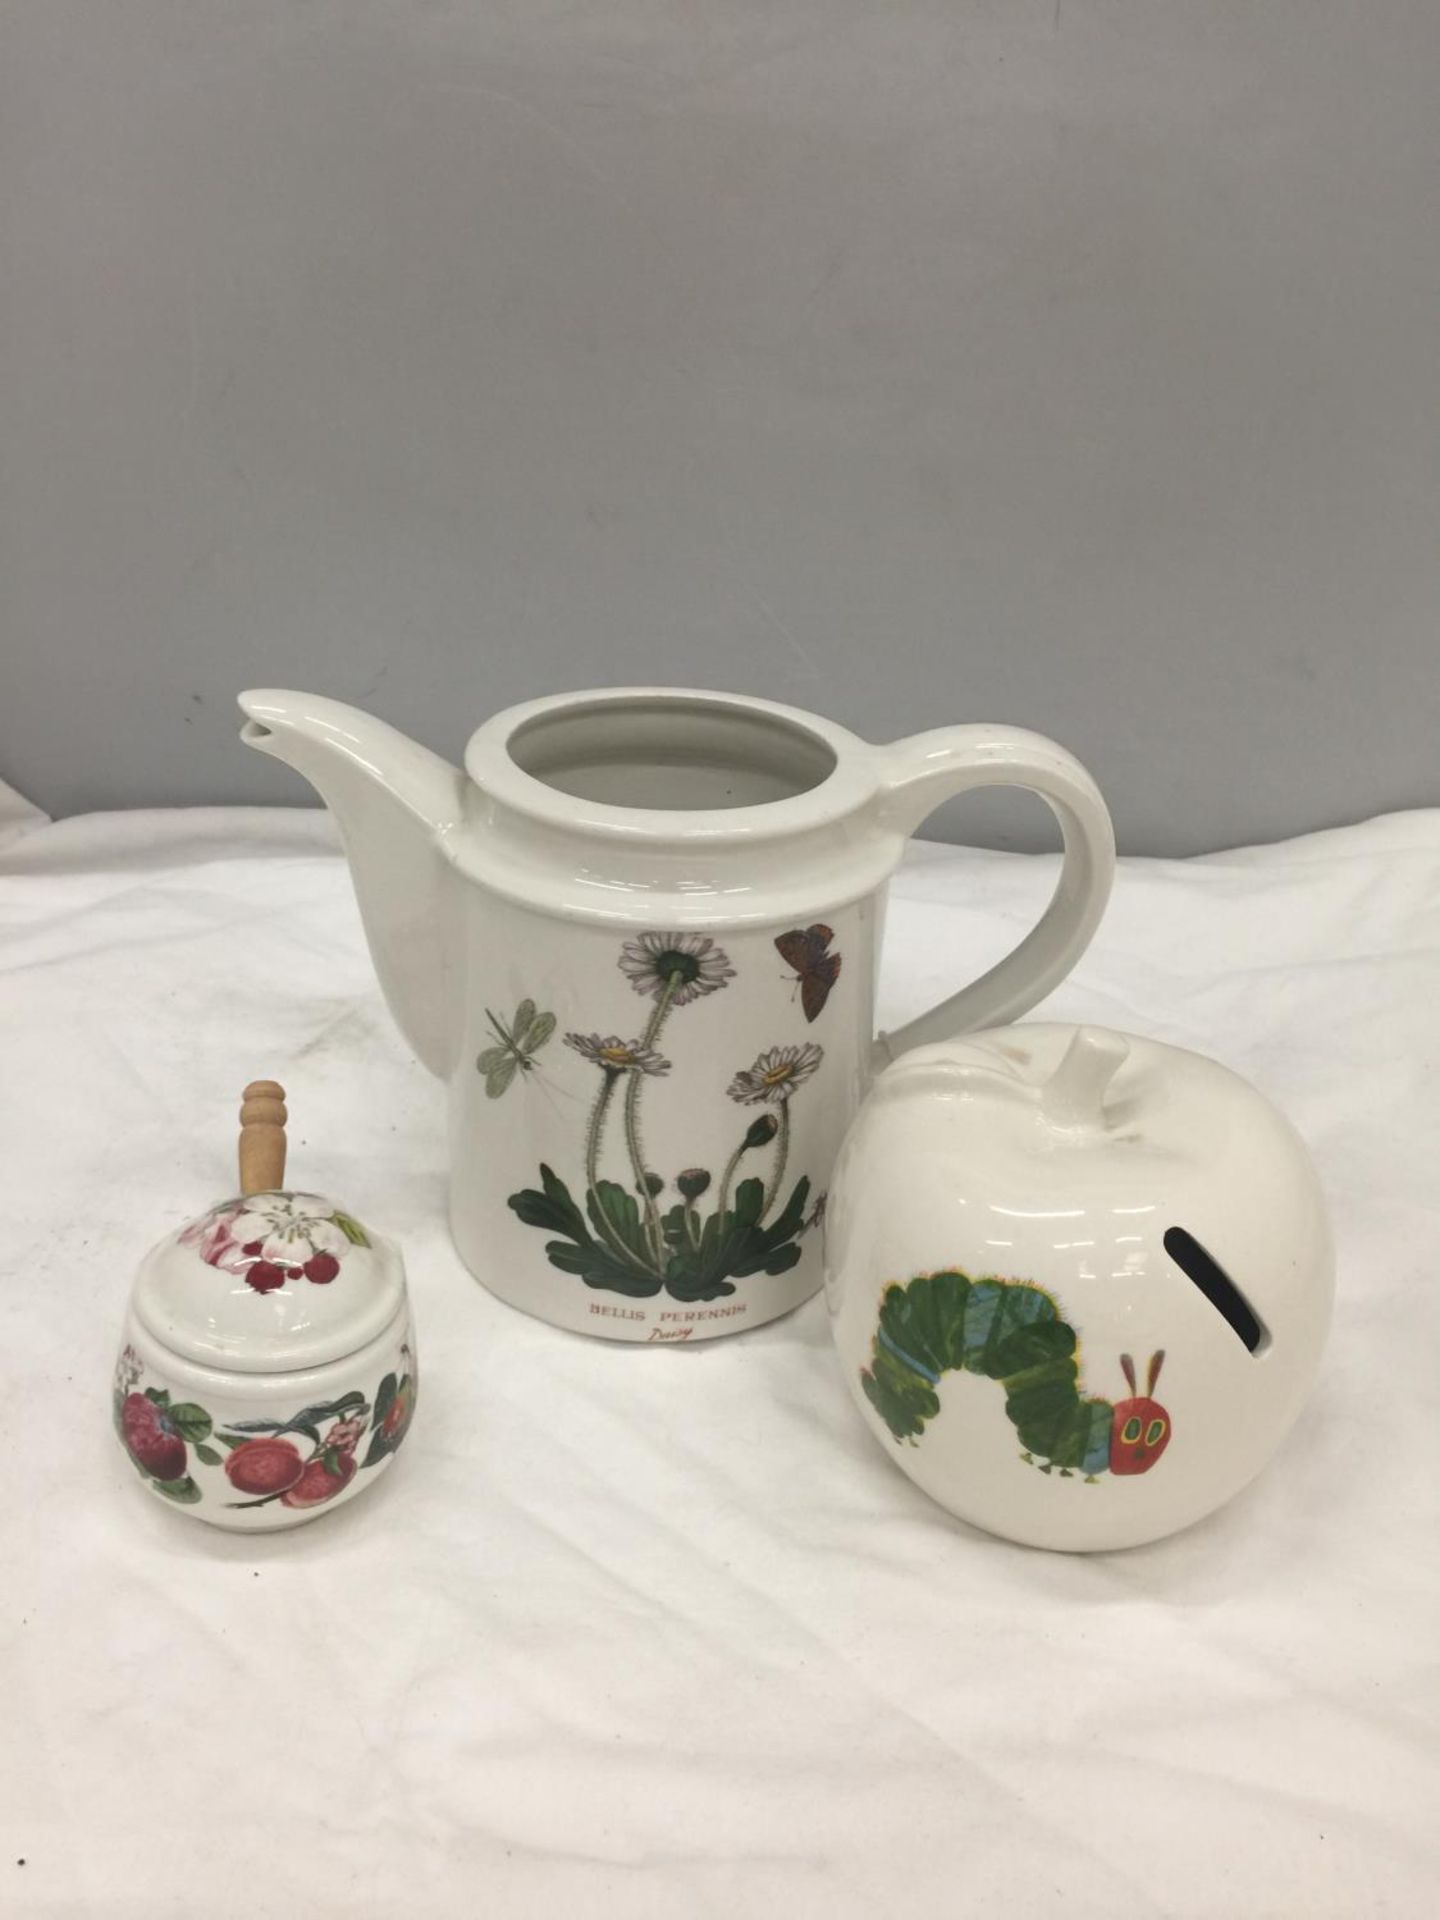 THREE PIECES OF PORTMERION TO INCLUDE A TEAPOT-NO LID- A HUNGRY CATERPILLAR MONEY BOX AND A PRESERVE